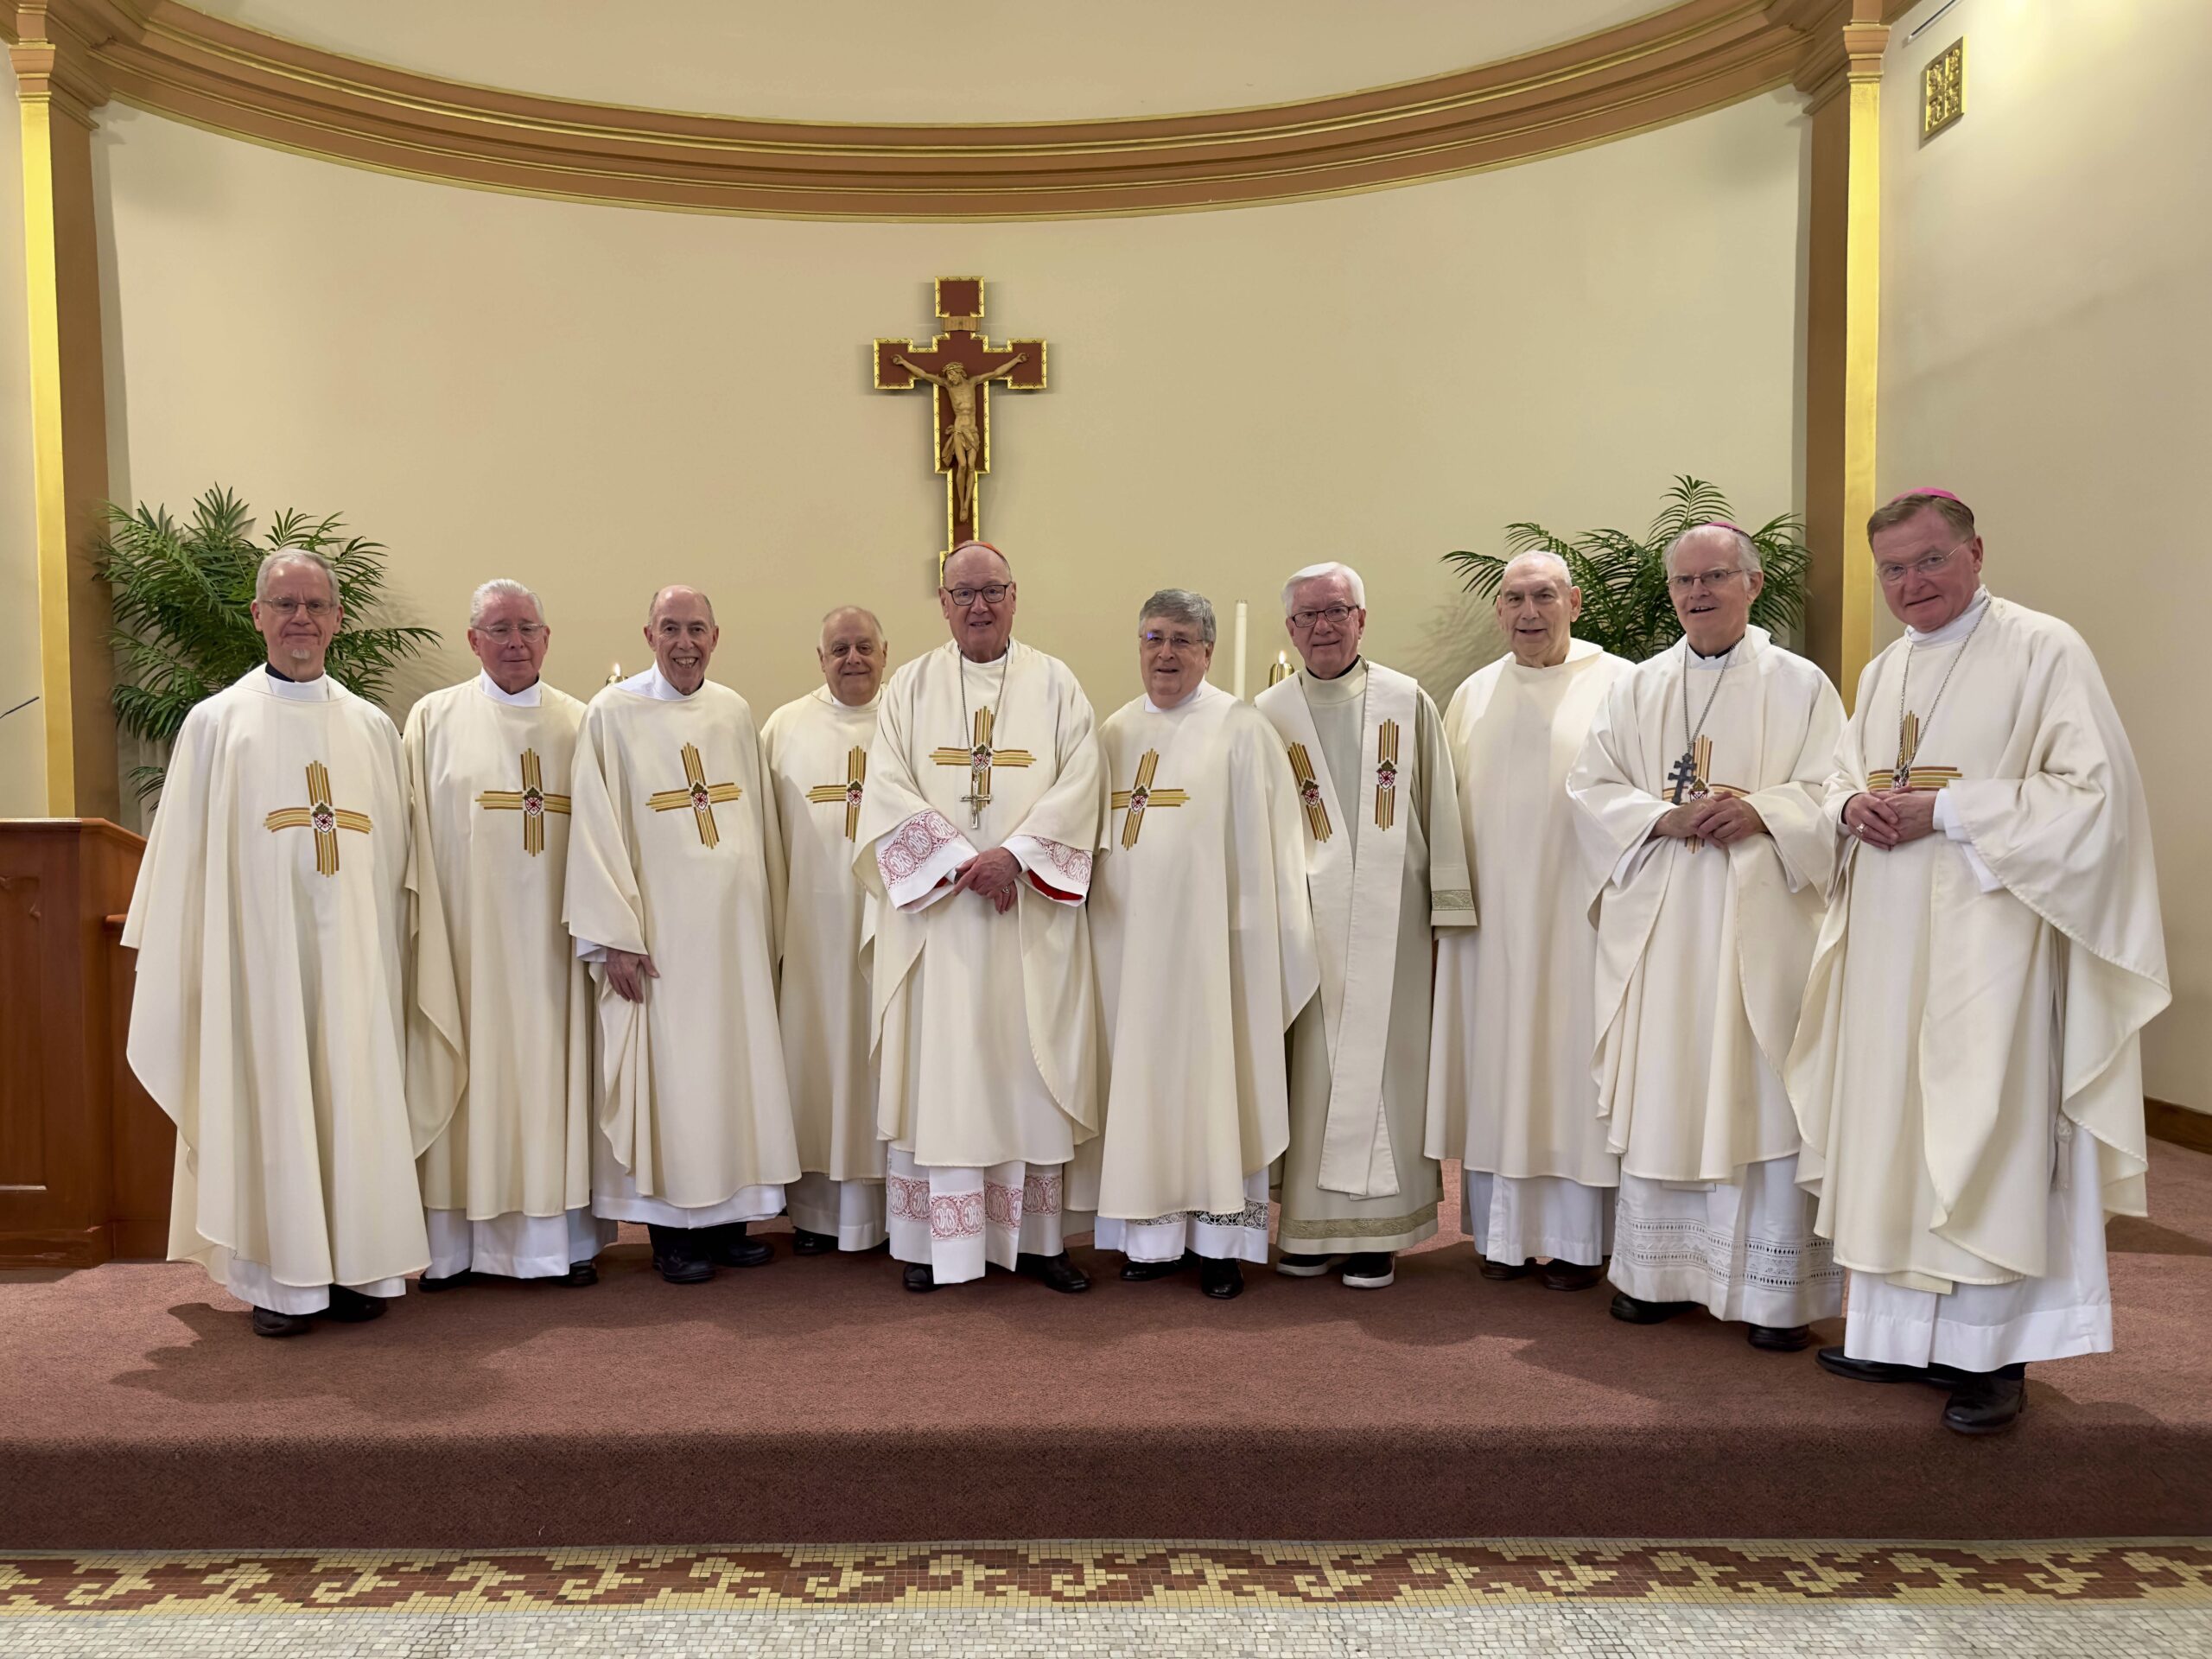 Cardinal Timothy Dolan (center) celebrated Mass in the Main Chapel of the St. John Vianney Clergy Residence in Riverdale to mark the jubilees of priests who have reached 50 and 25 years of priestly service, respectively.